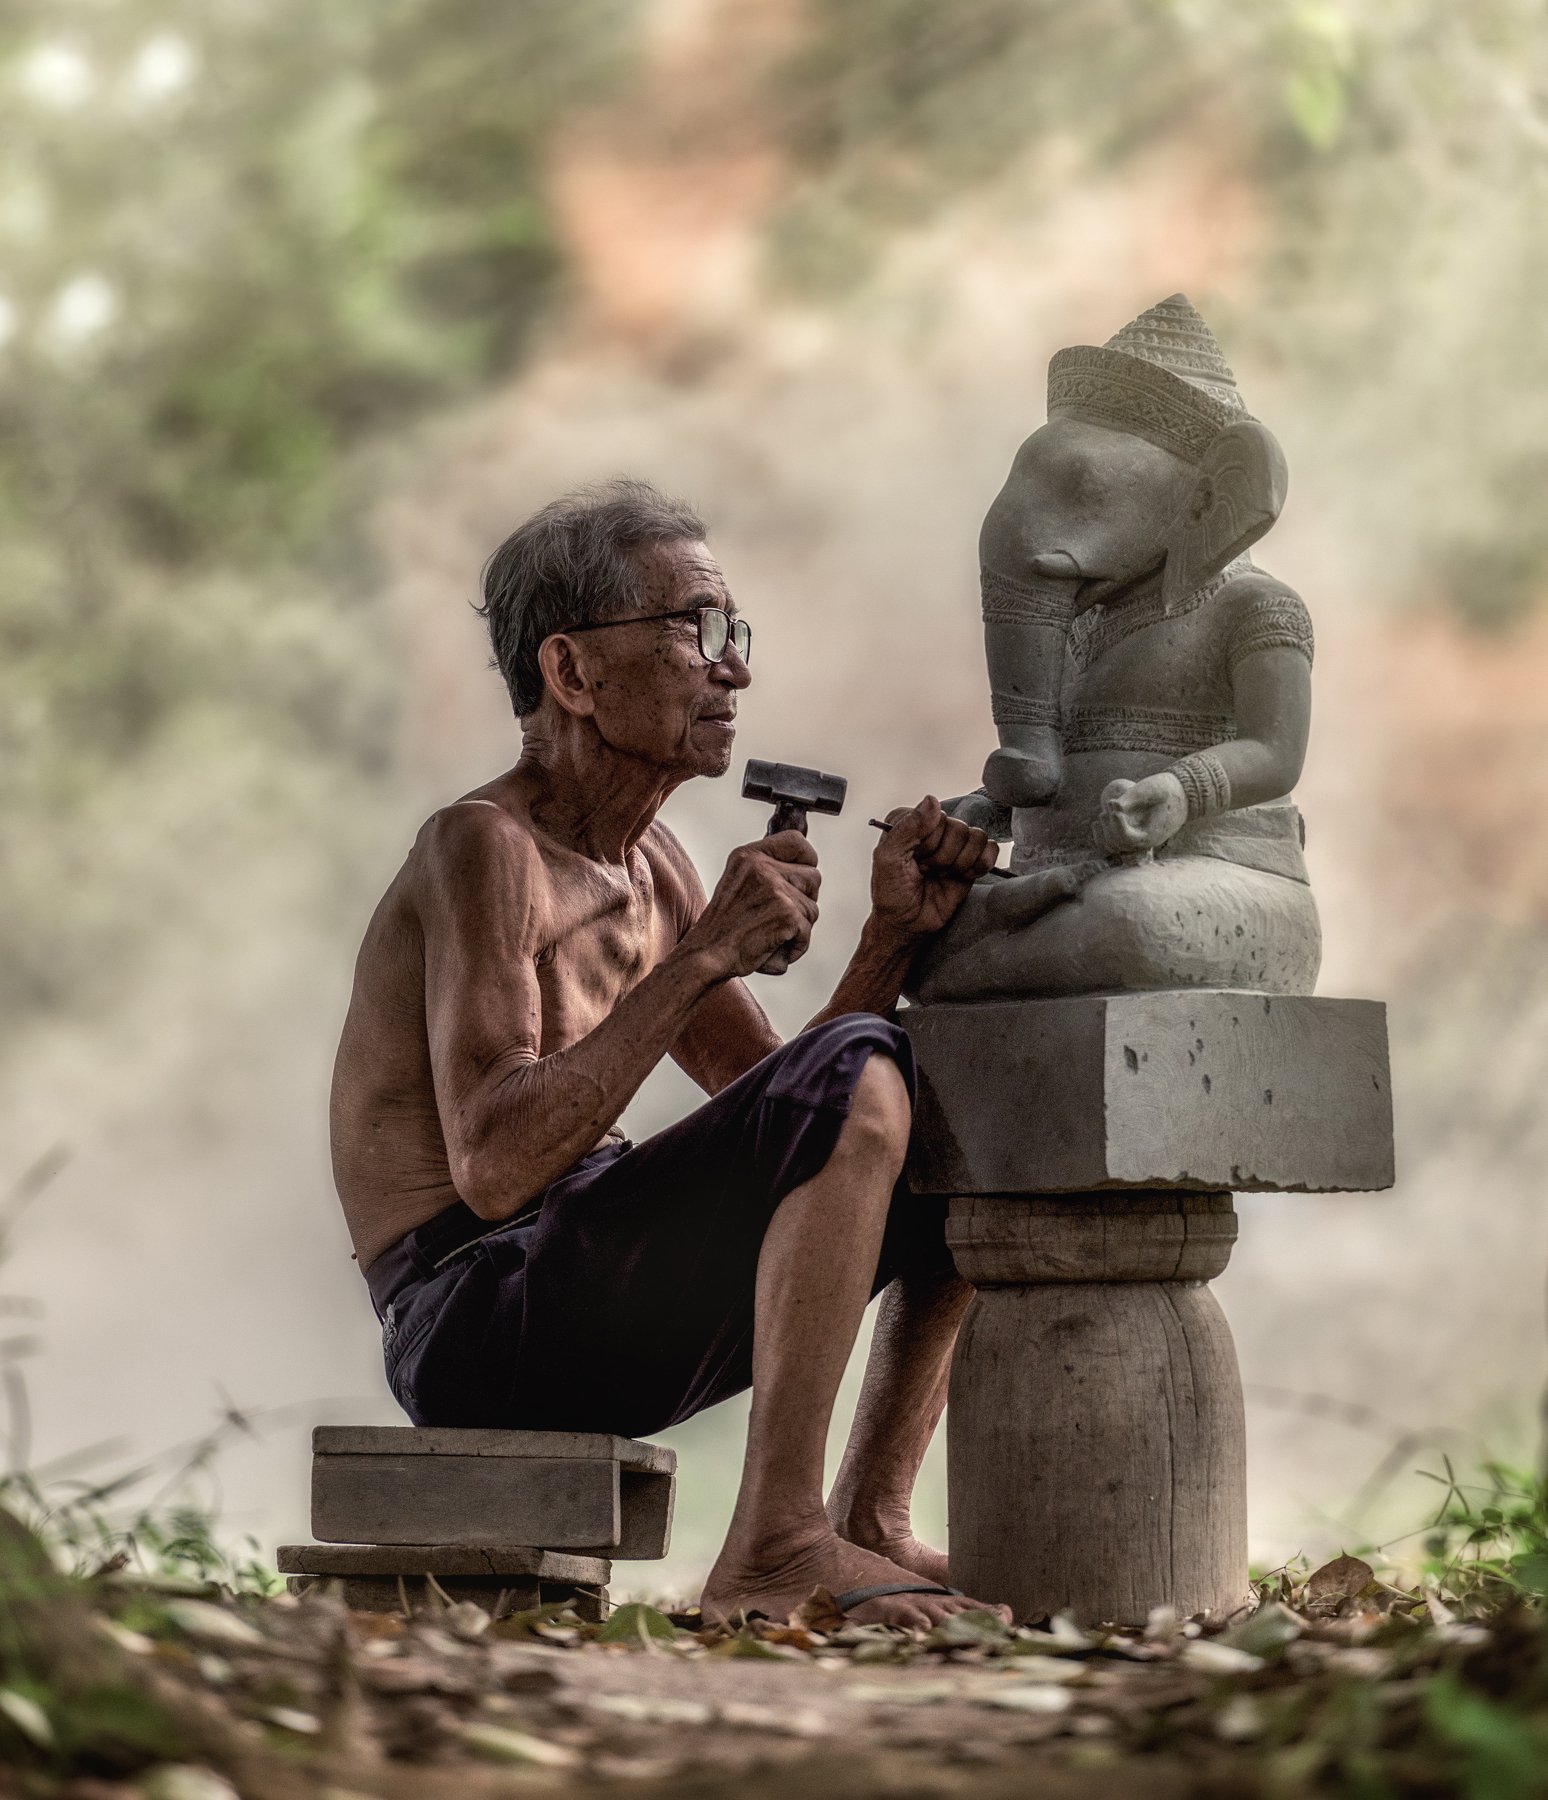 stone; tool; cambodia; chisel; hand; carver; worker; artistic; made; craftsman; decoration; activity; sculpture; oriental; carpentry; craft; construct; carving; sharp; brown; shaving; sand; handmade; chip; skill; traditional; asia; equipment; handwork; pi, Sasin Tipchai